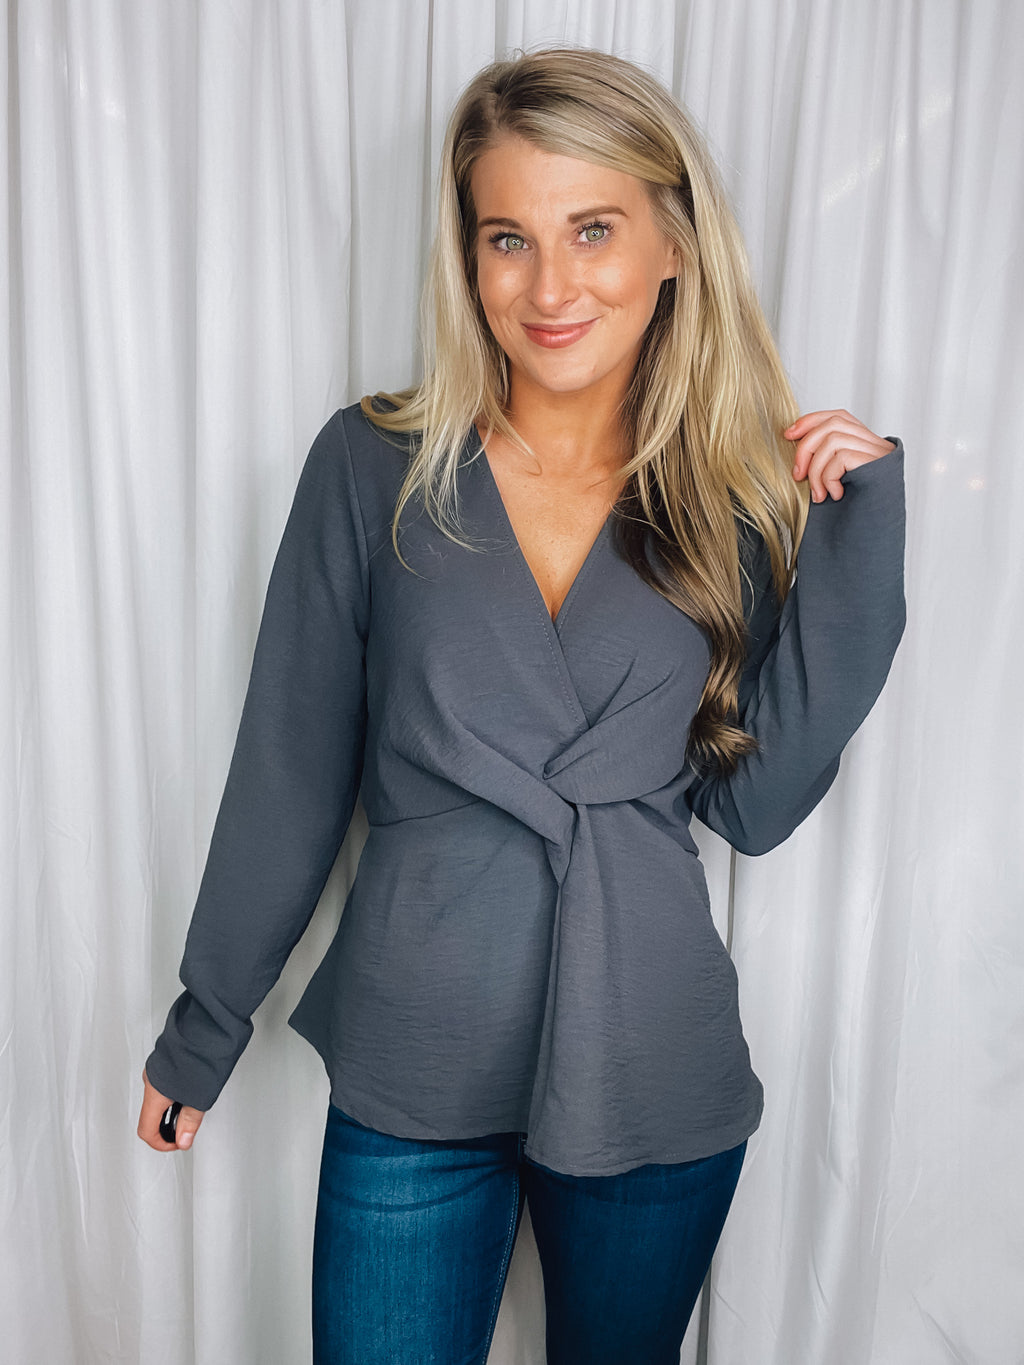 Top features a charcoal base, long sleeves, V-neck line, peplum fit, front knot detail, and runs true to size! 